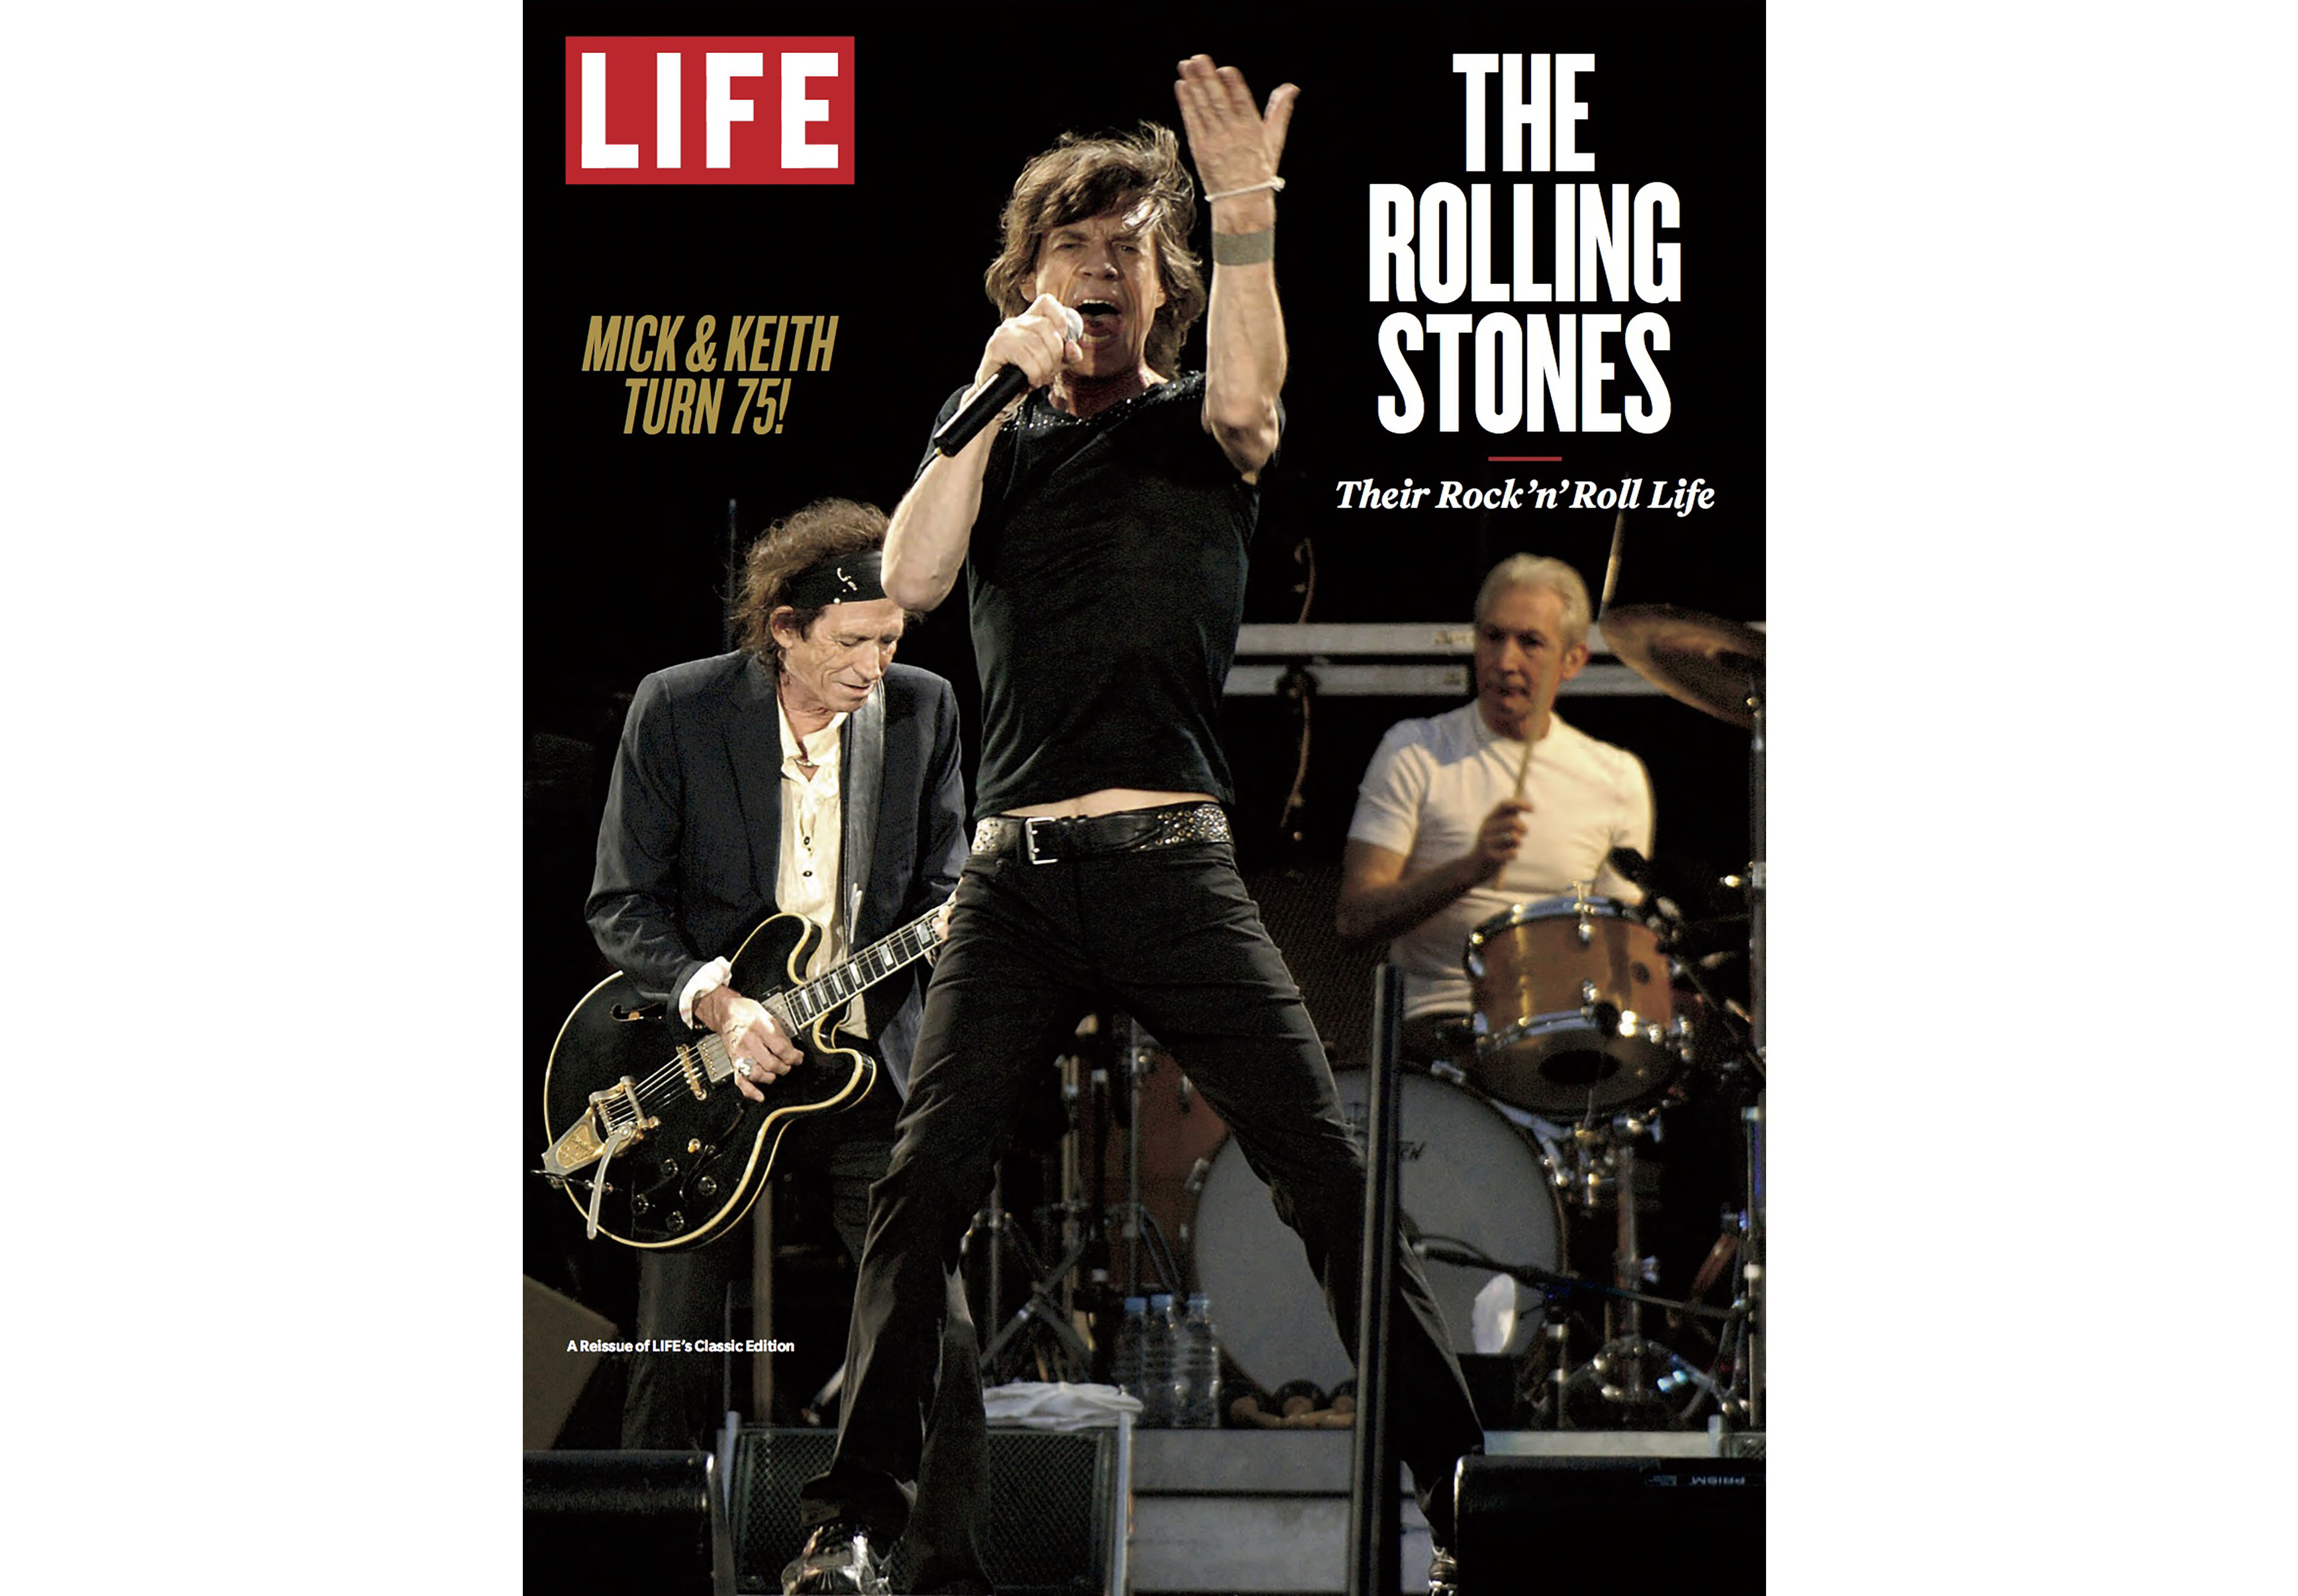 Mick Jagger on the cover of LIFE. (LIFE Galleries)